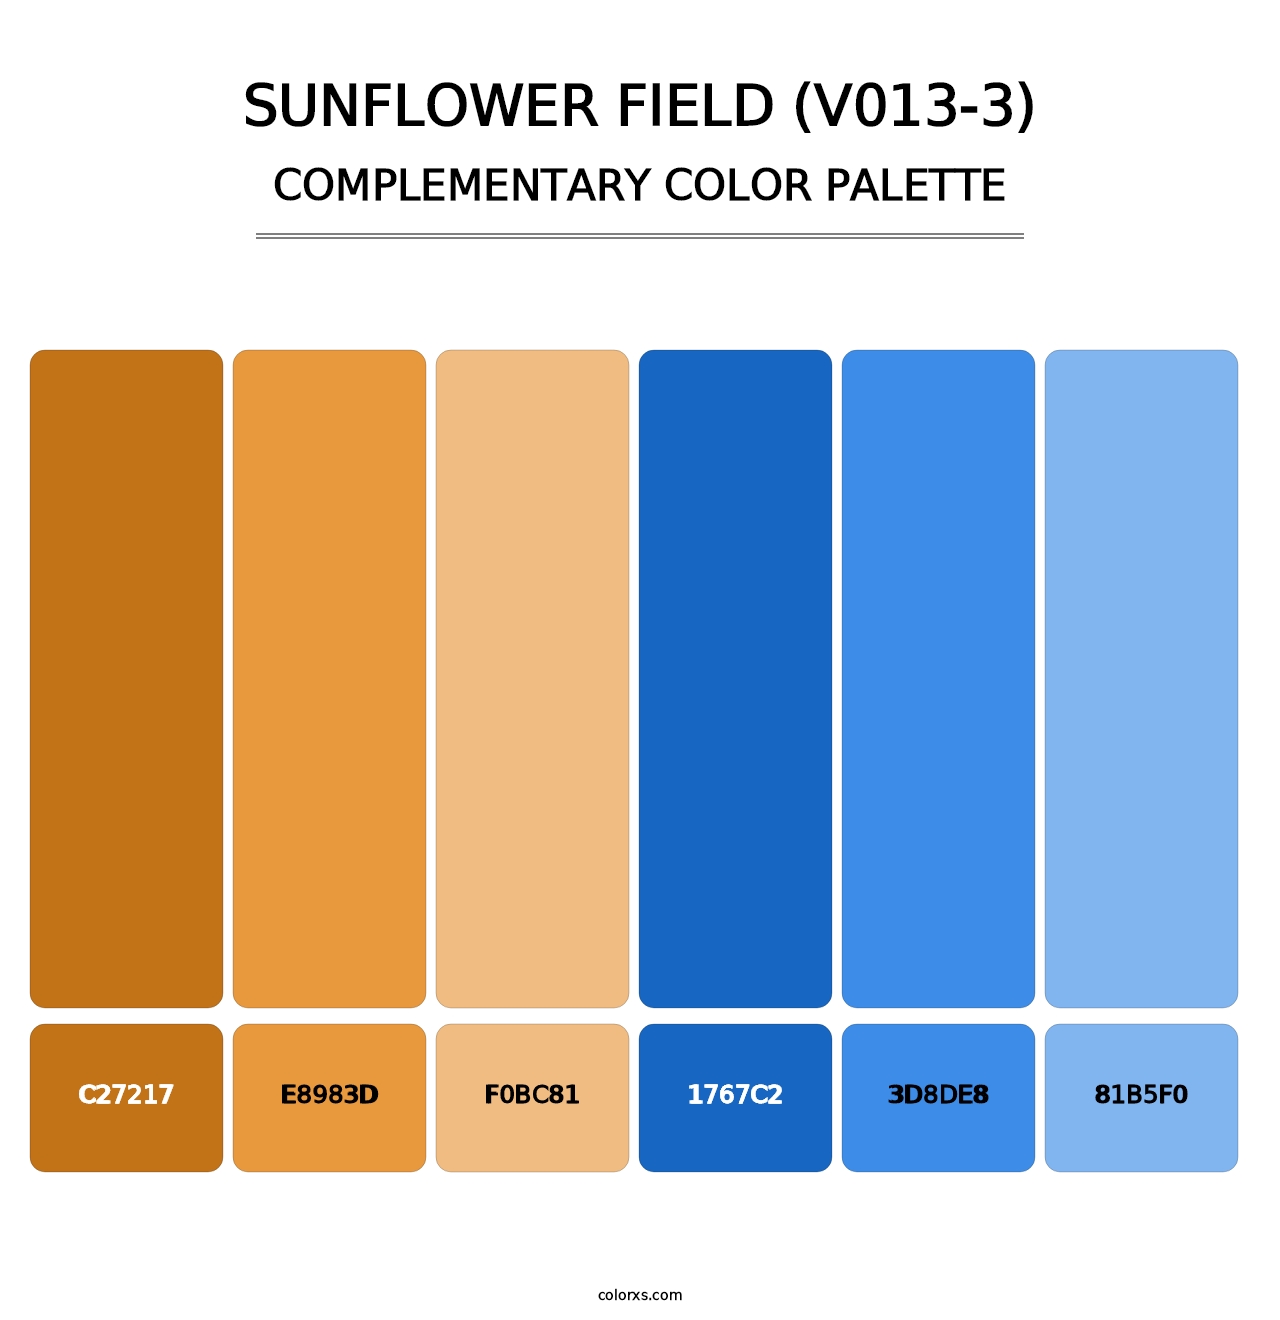 Sunflower Field (V013-3) - Complementary Color Palette